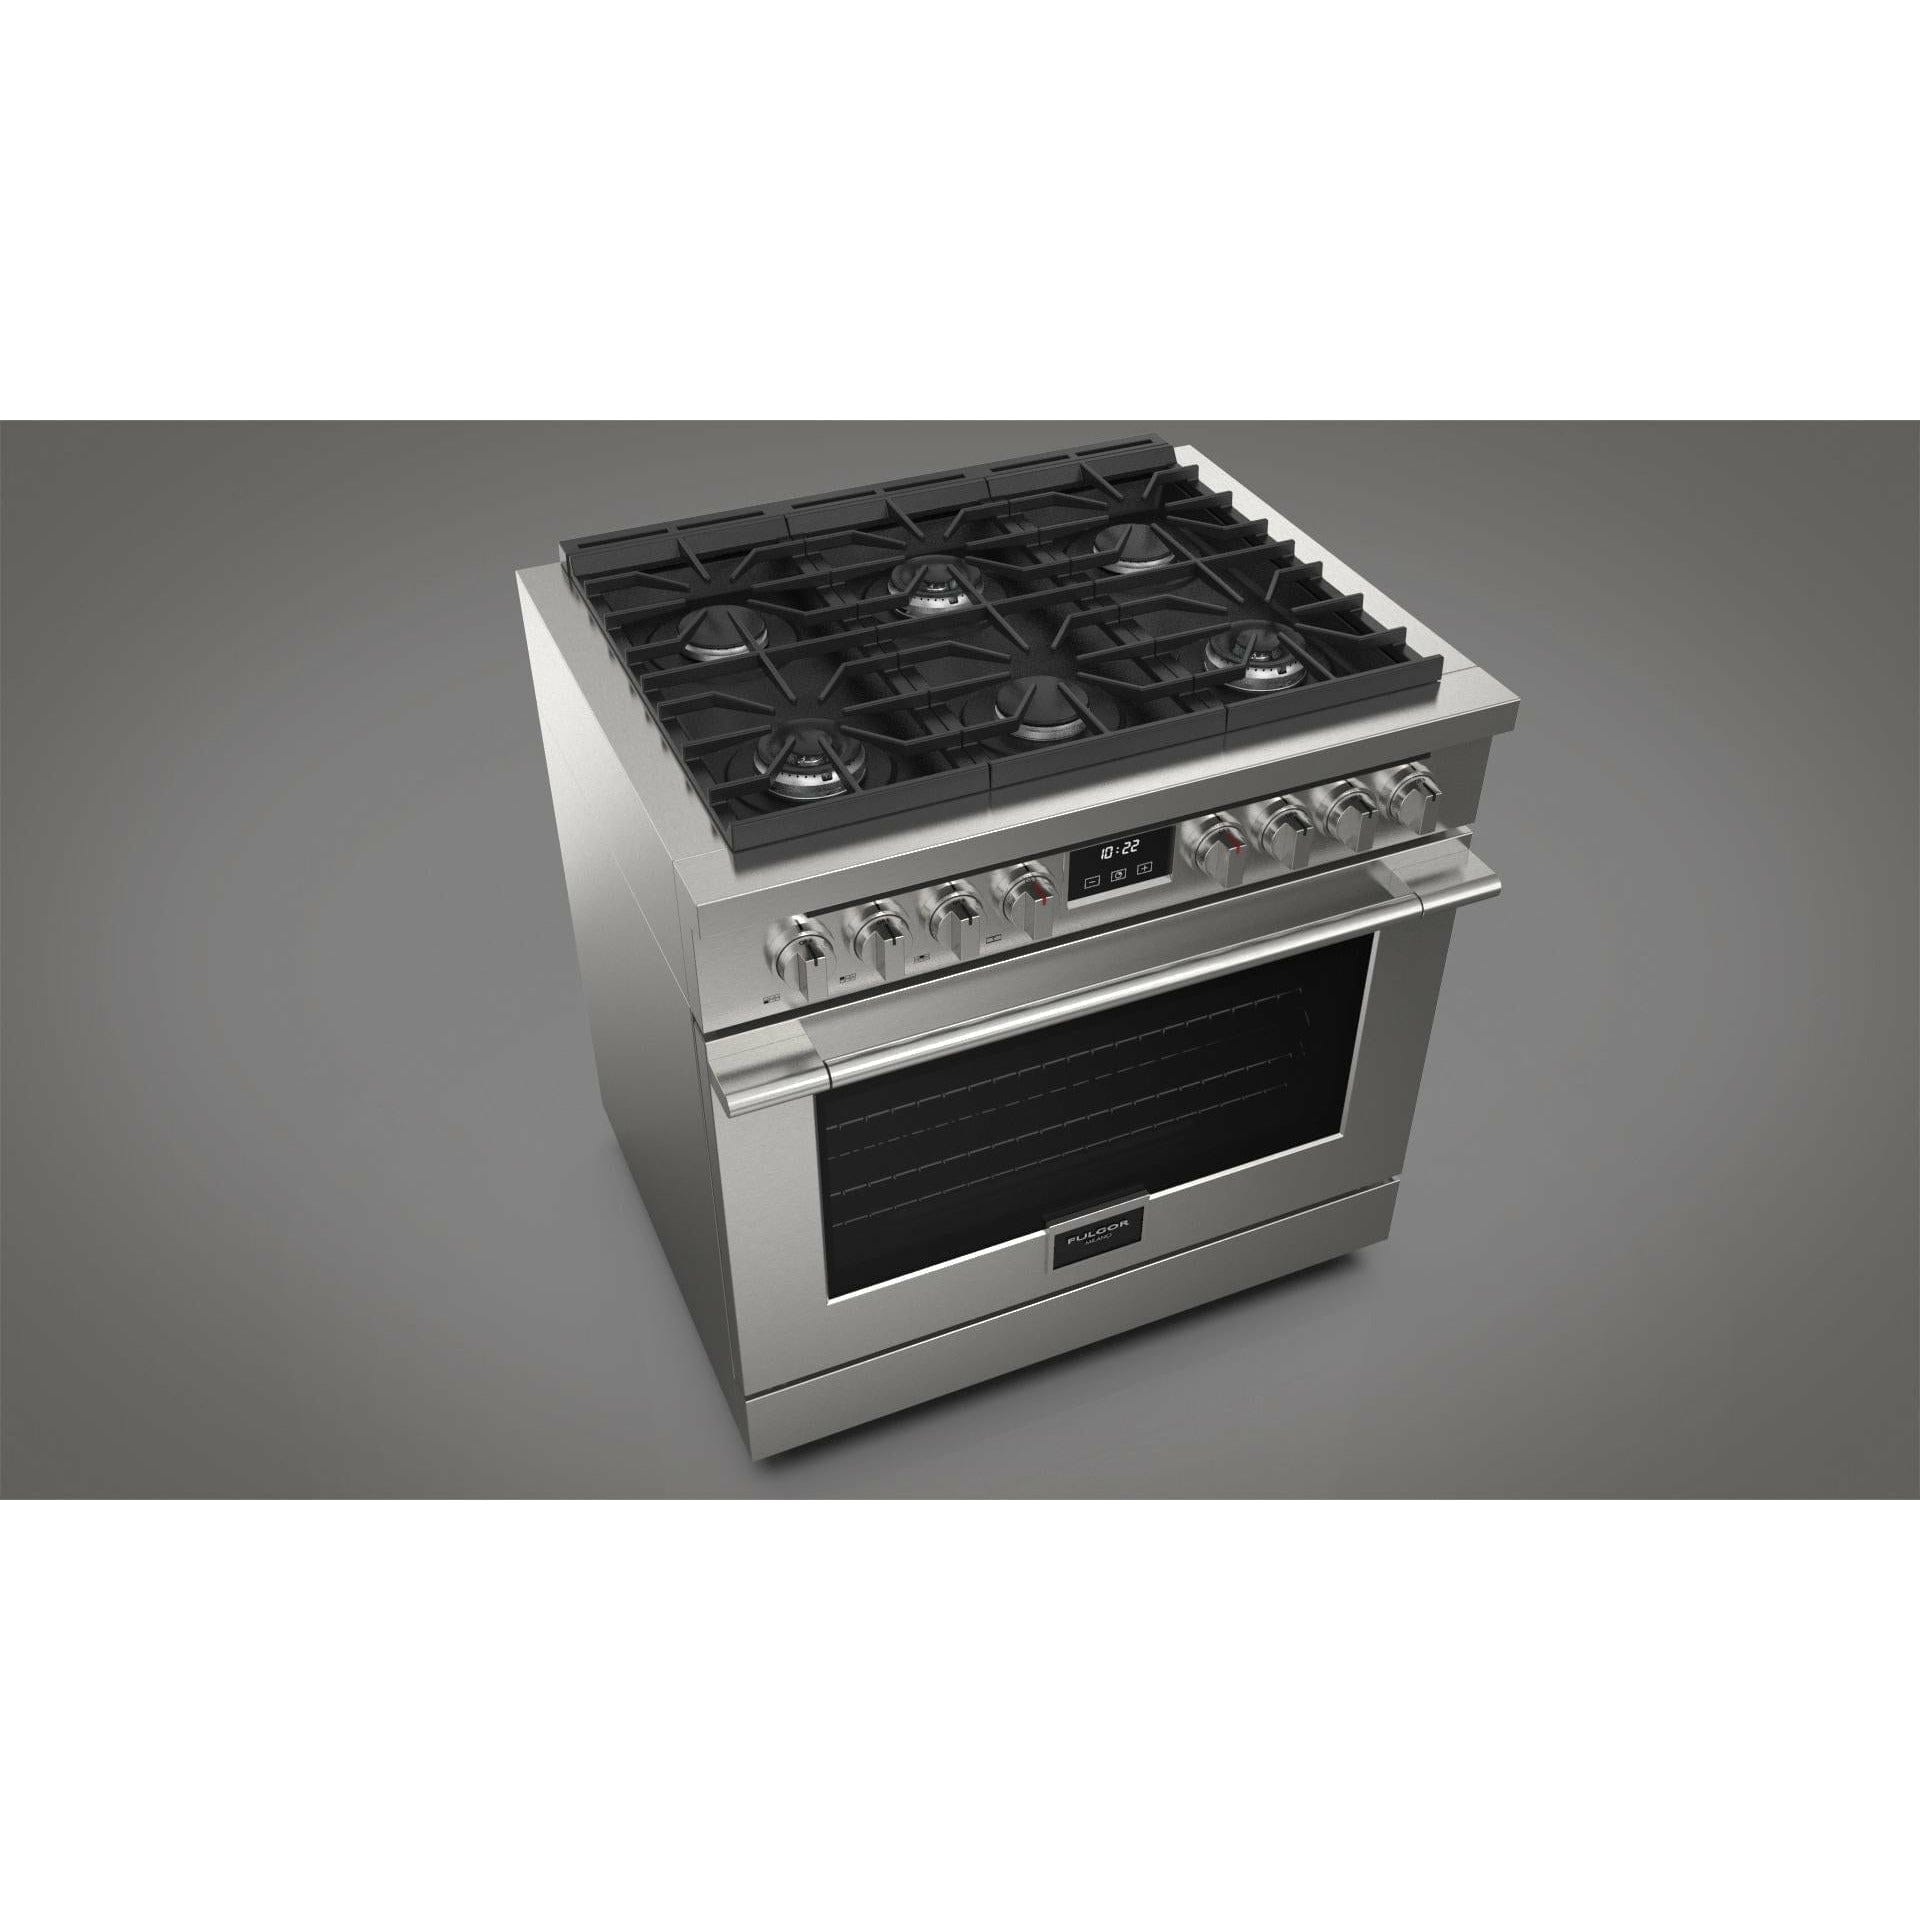 Fulgor Milano 36" Freestanding All Gas Range with 3 Duel Flame Burners, Stainless Steel - F4PGR366S2 Ranges Luxury Appliances Direct